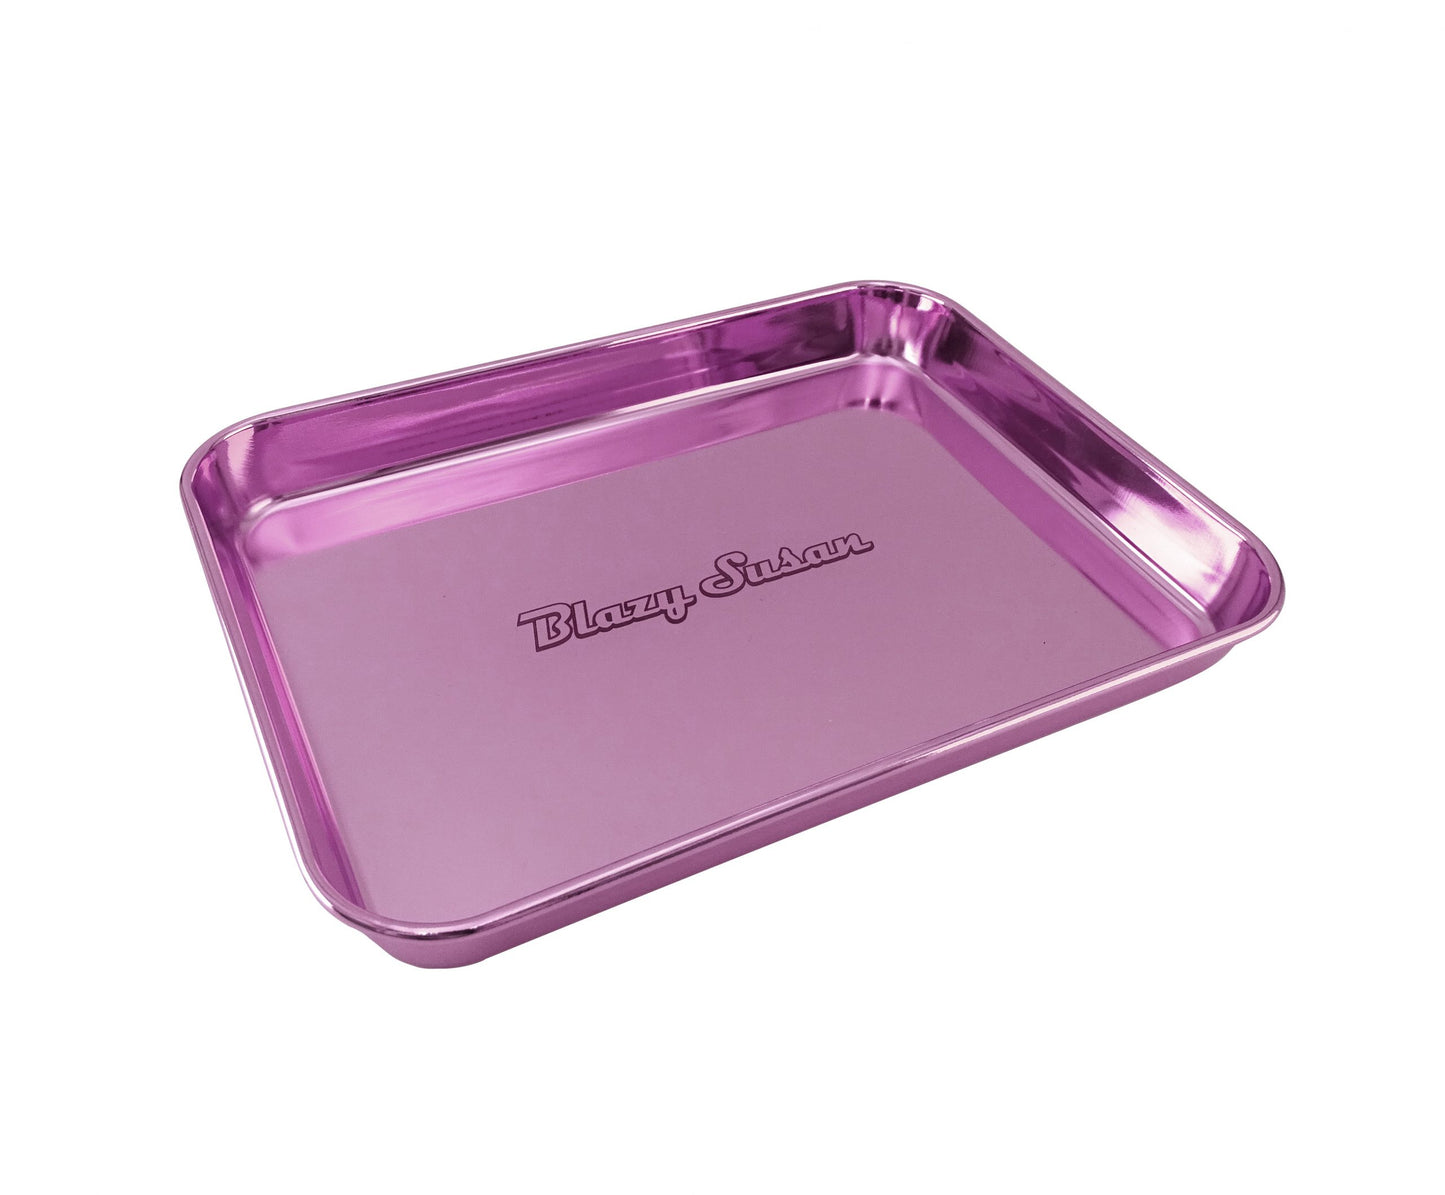 Blazy Susan Rose Purple Stainless Steel Rolling Tray - 22cm x 17cm - Blazy Susan - Smoking Accessories - Rolling Refills